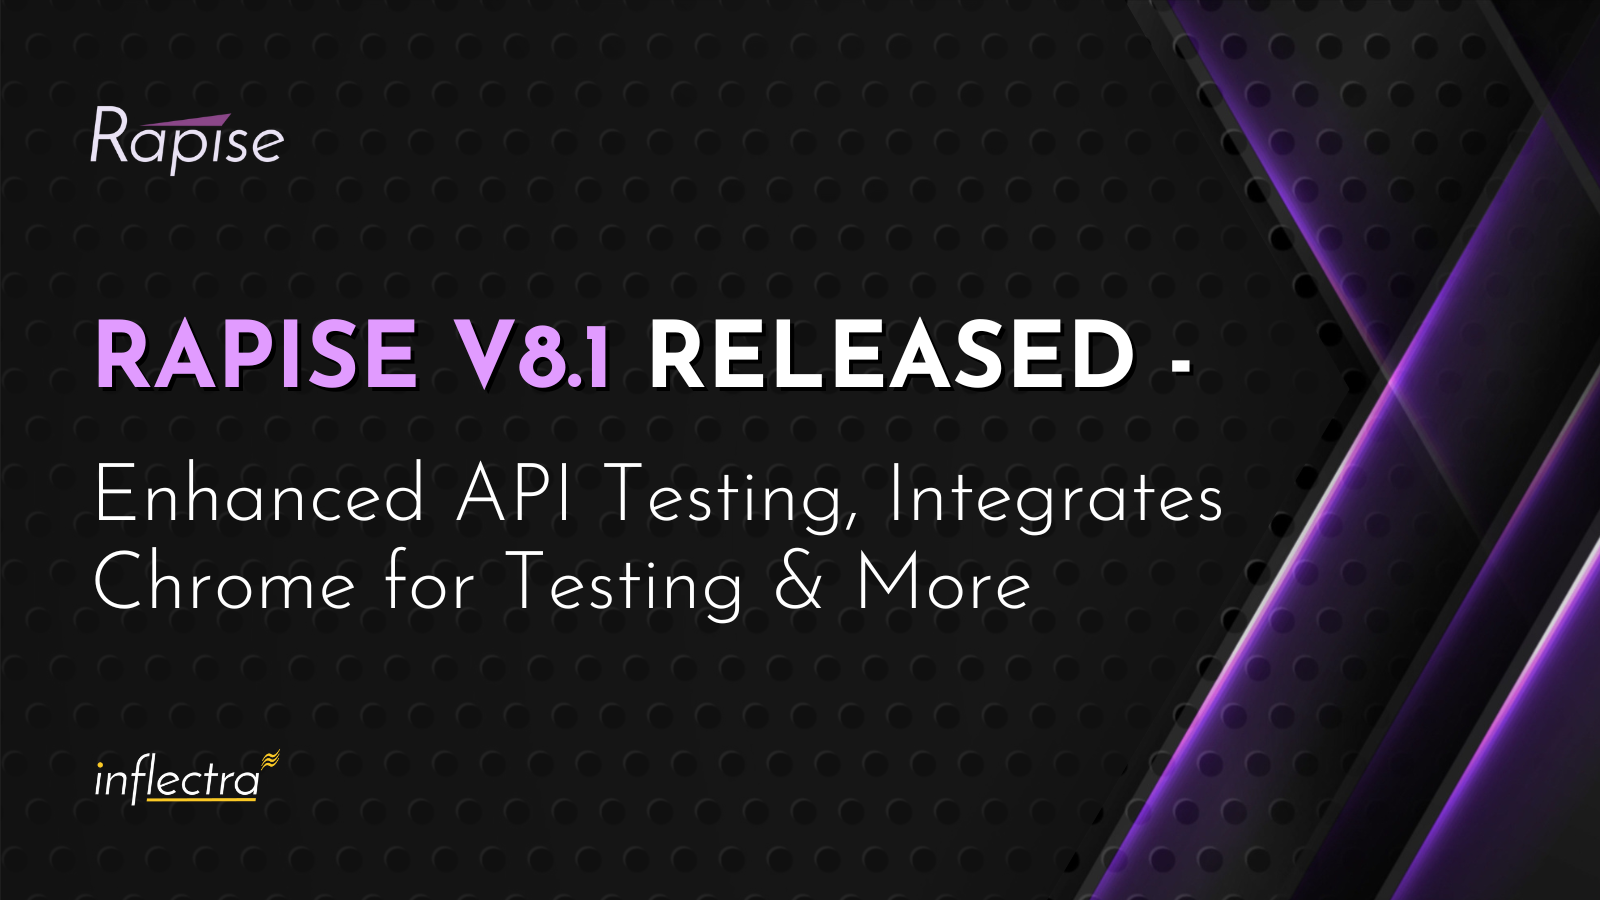 inflectra-rapise-eight-point-one-released-with-enhanced-api-testing-integrates-chrome-for-testing-and-more-image